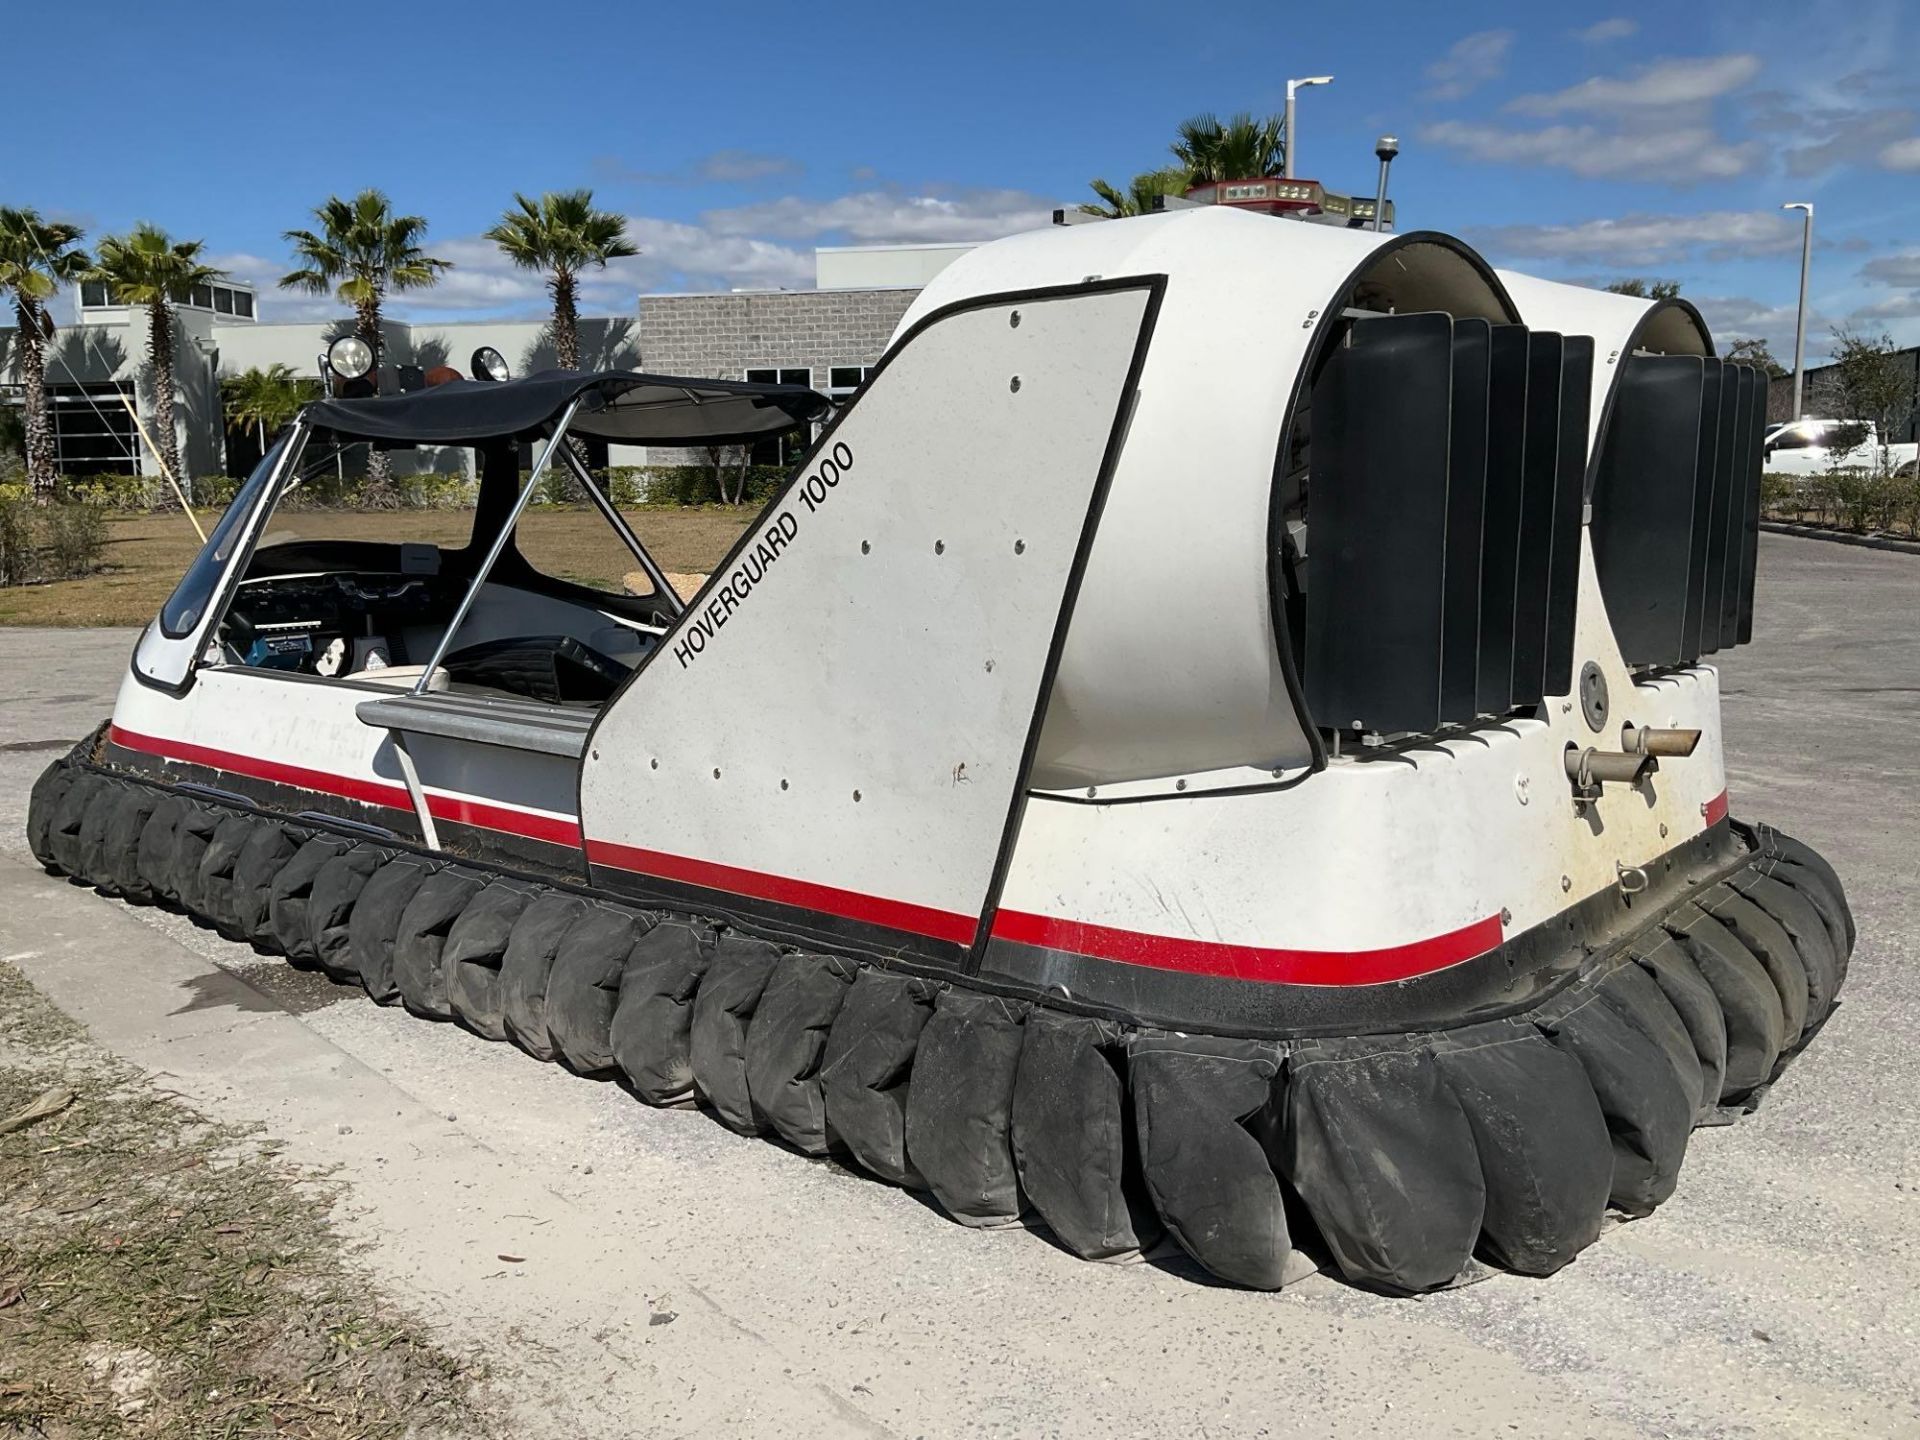 HOVERGUARD HOVERCRAFT W/TRAILER, HOVERTOUR 1000 MODEL 7900200, NEW BATTERY , 37 HRS SHOWING - Image 5 of 39